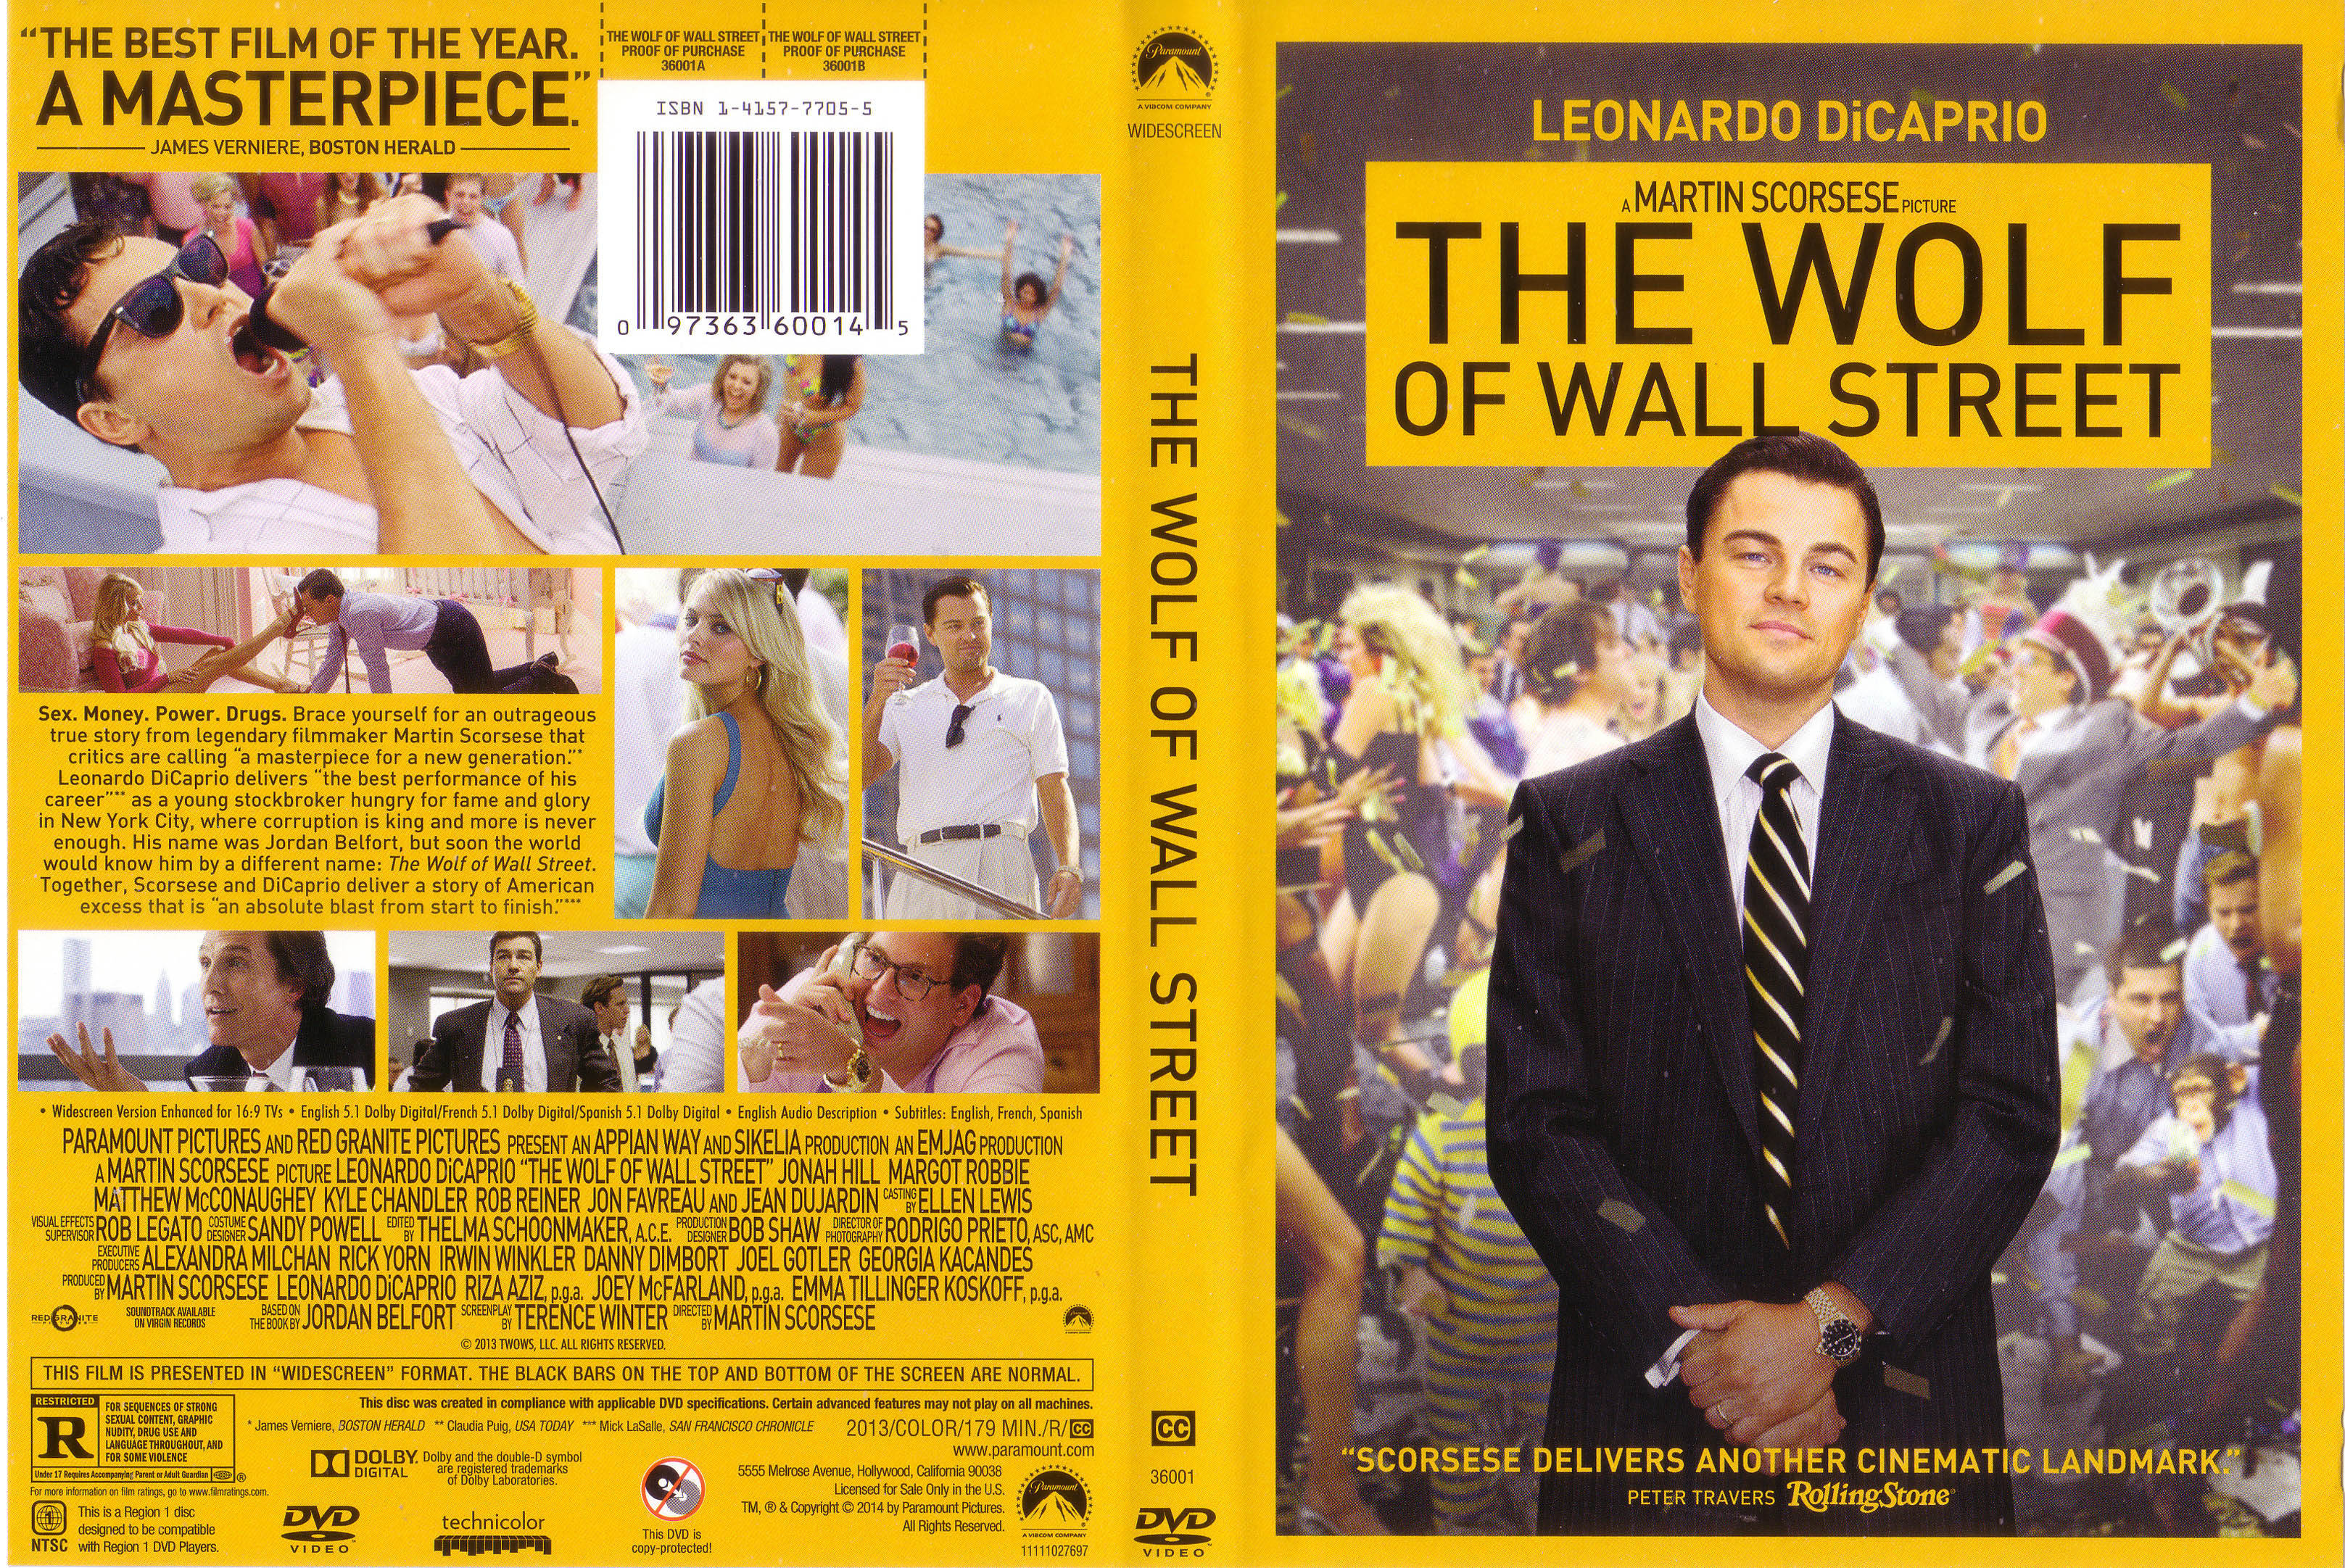 Jaquette DVD The wolf of wall street Zone 1